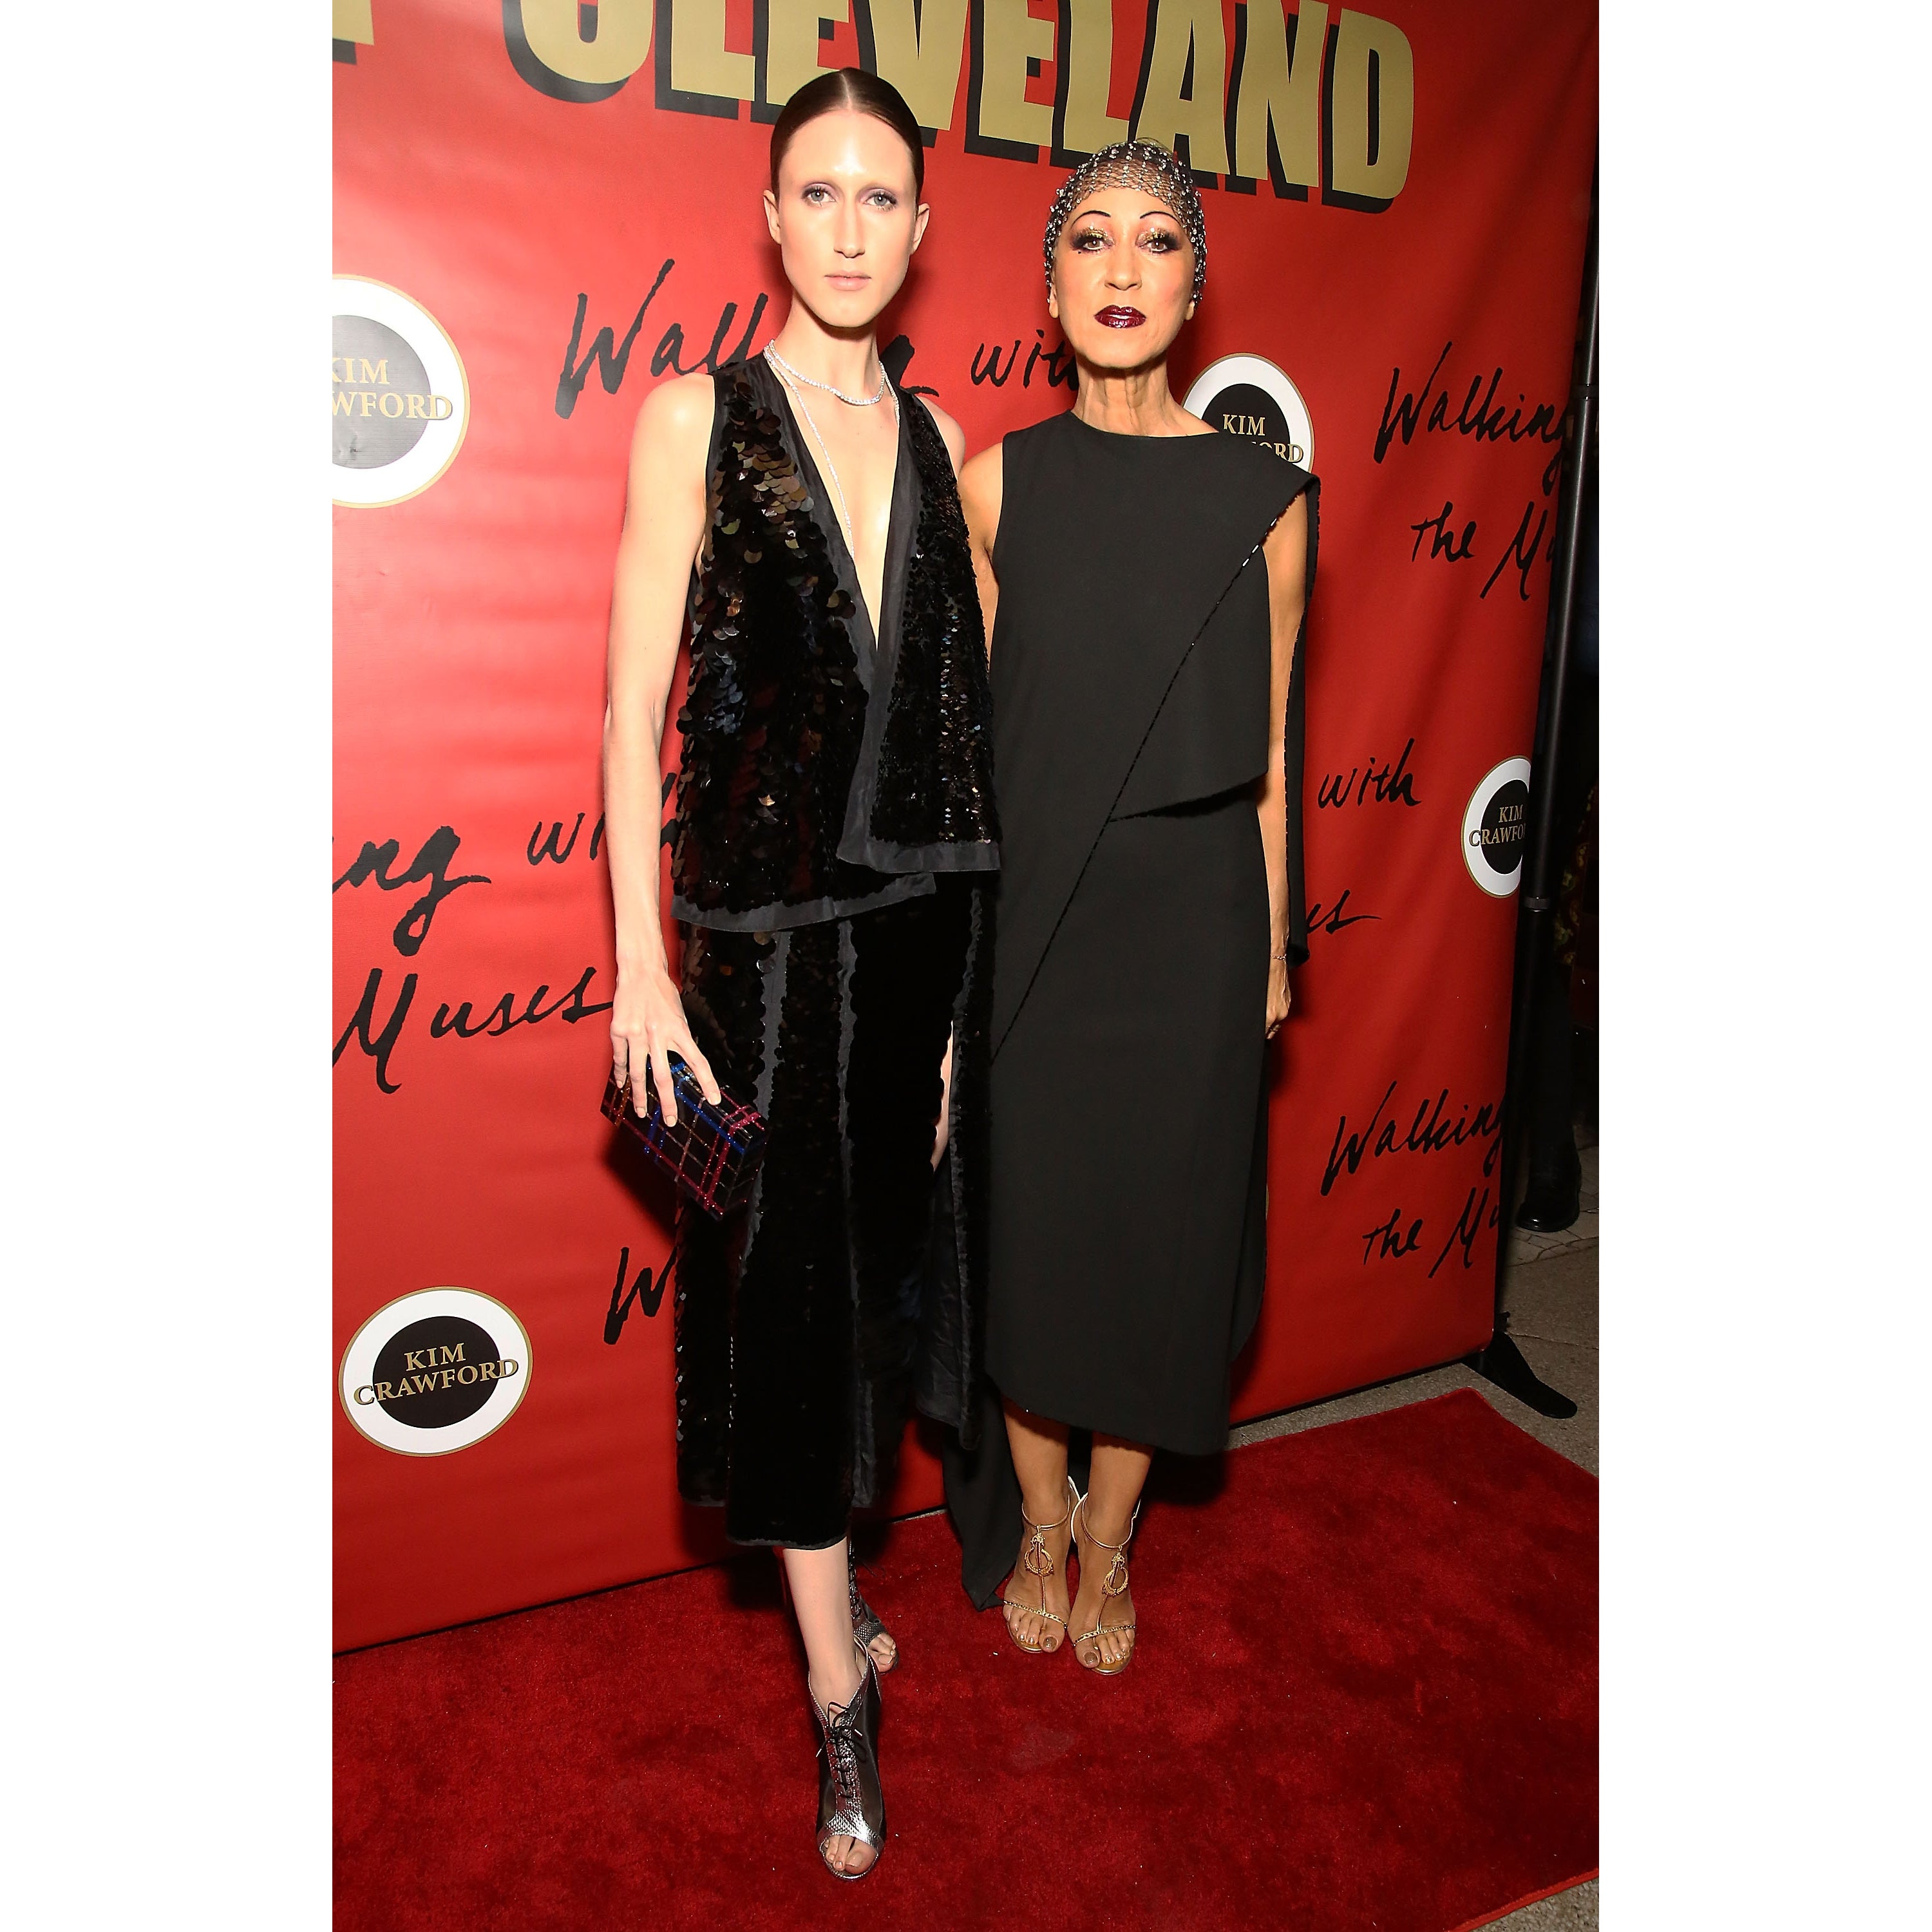 Pat Cleveland's 1920's Themed Book Release Party Was Everything
